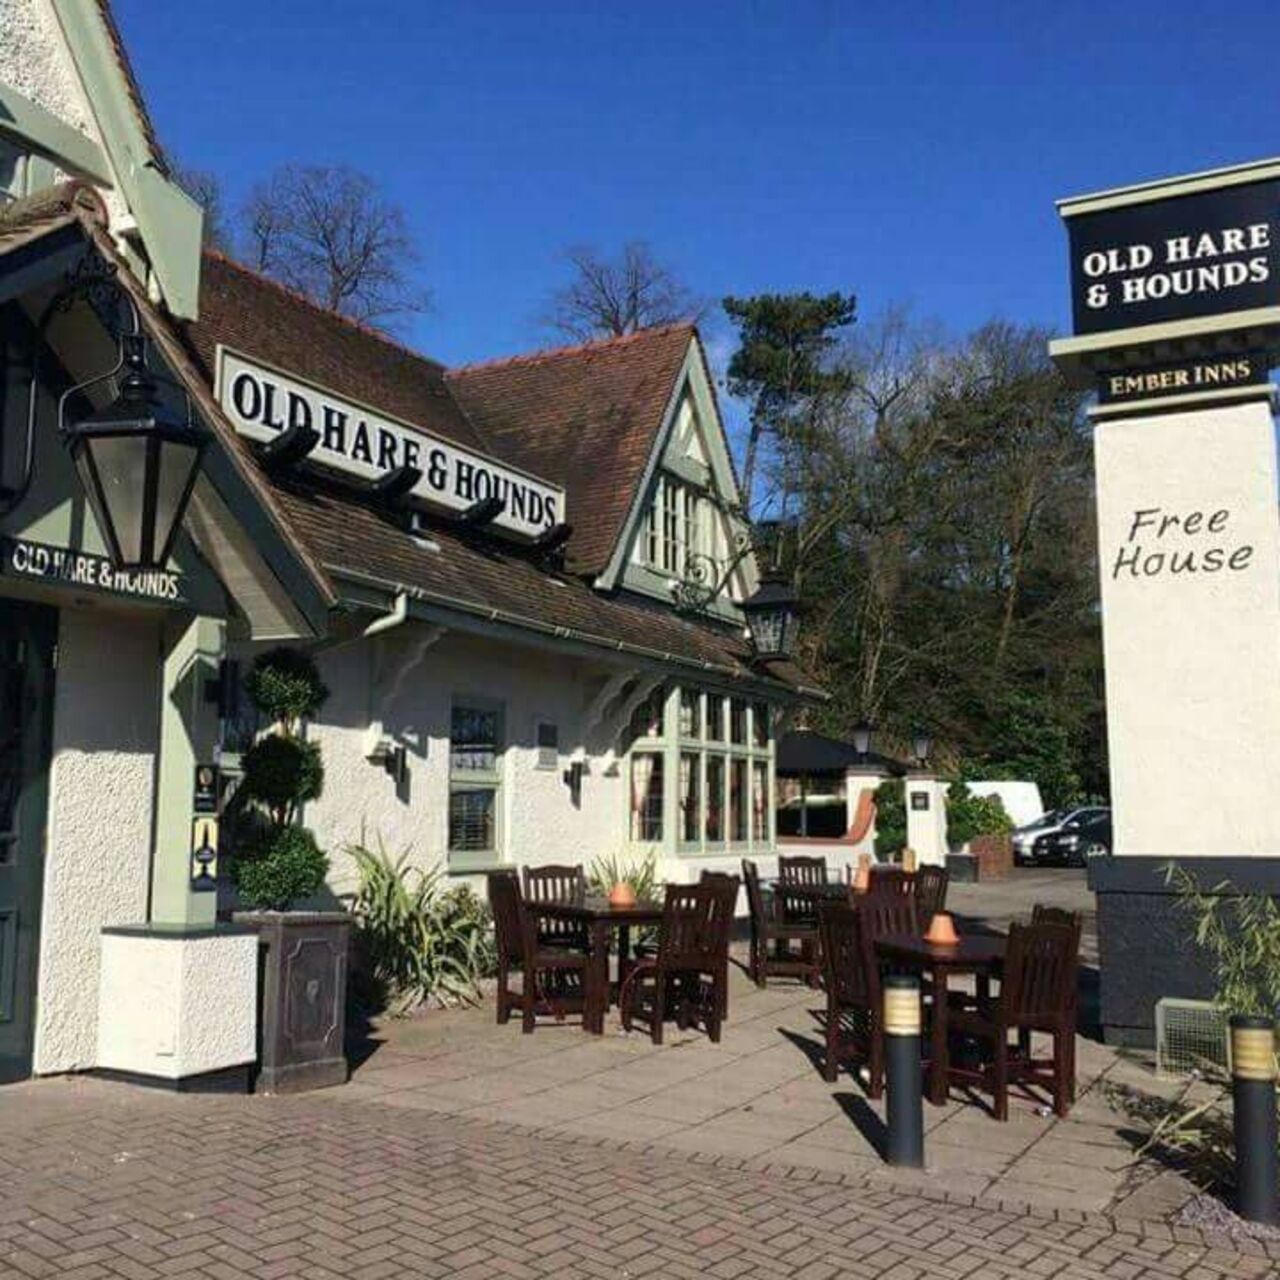 A photo of The Old Hare & Hounds